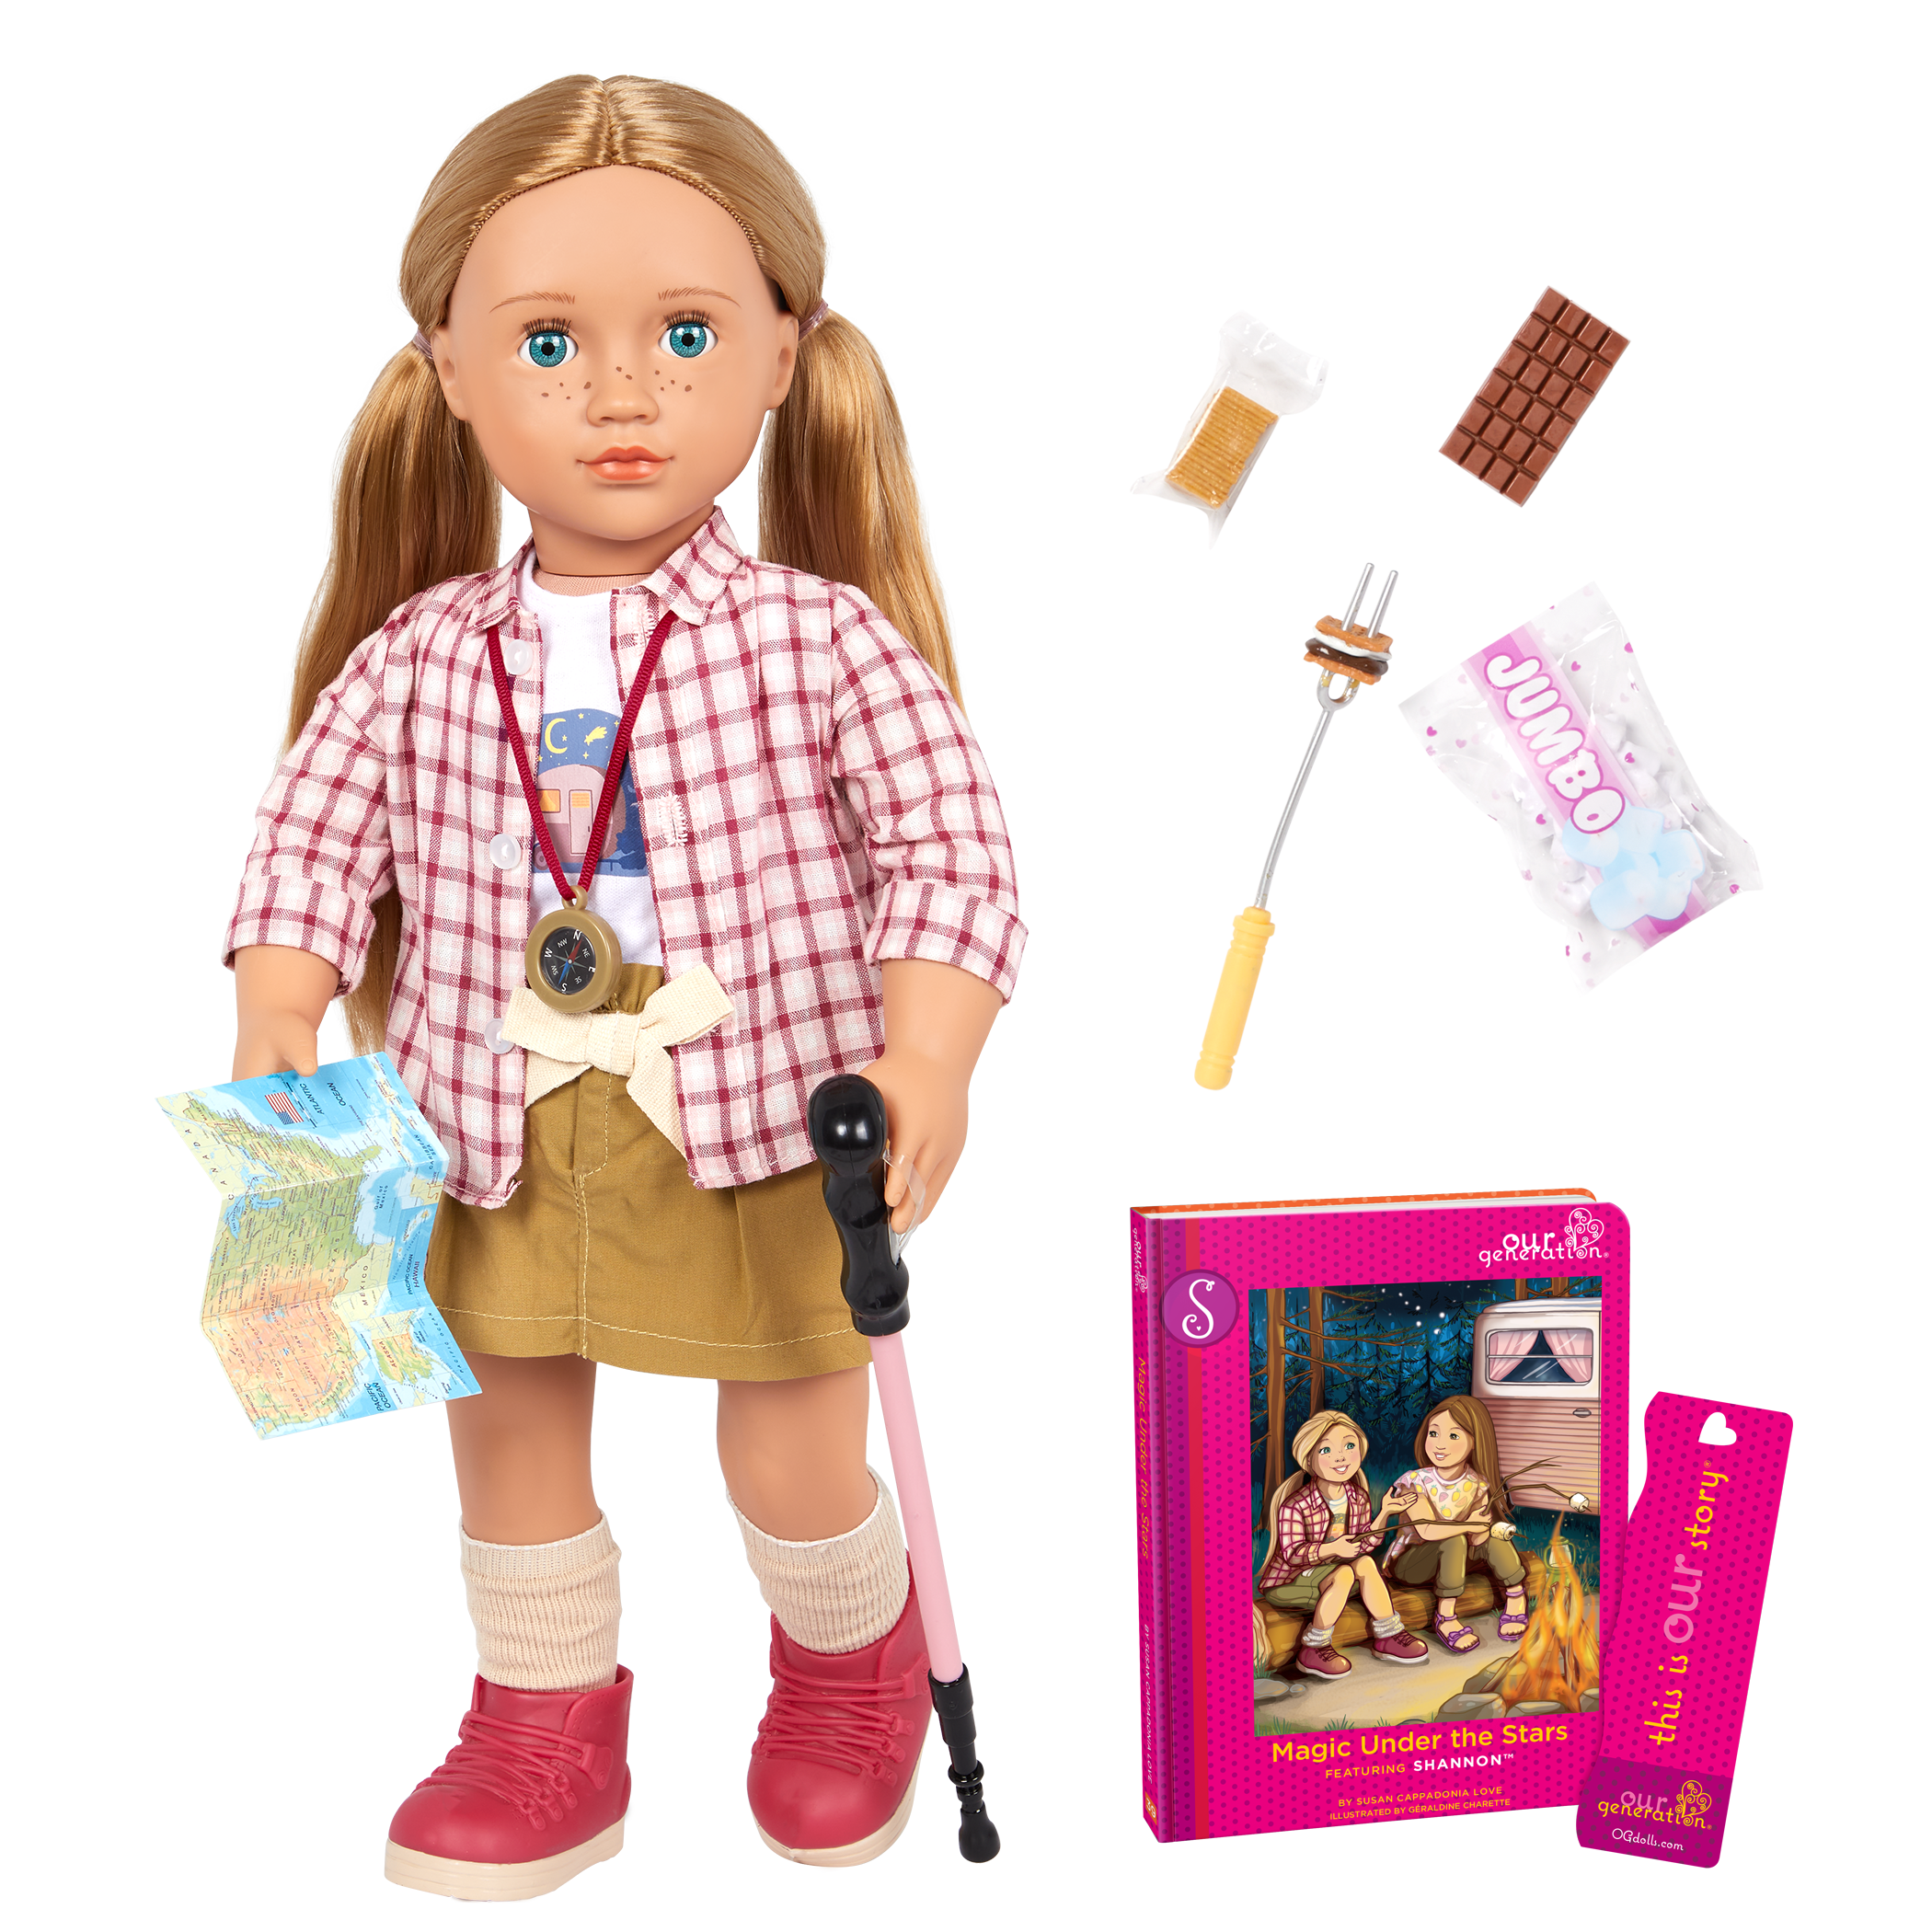 Our Generation Posable 18-inch Camping Doll Shannon